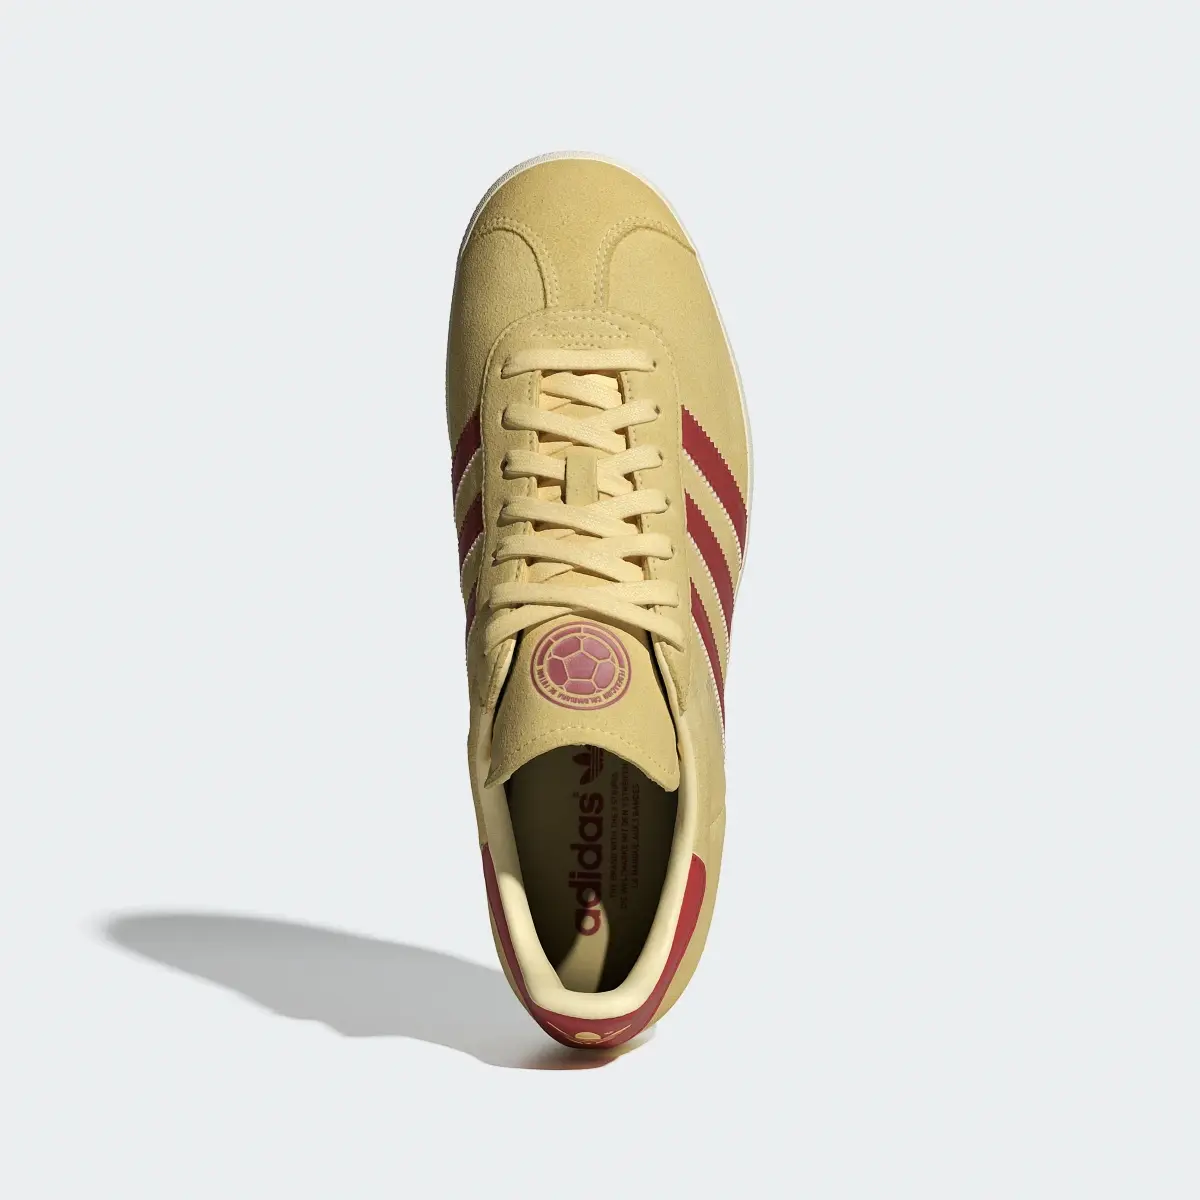 Adidas Gazelle Colombia Shoes. 3